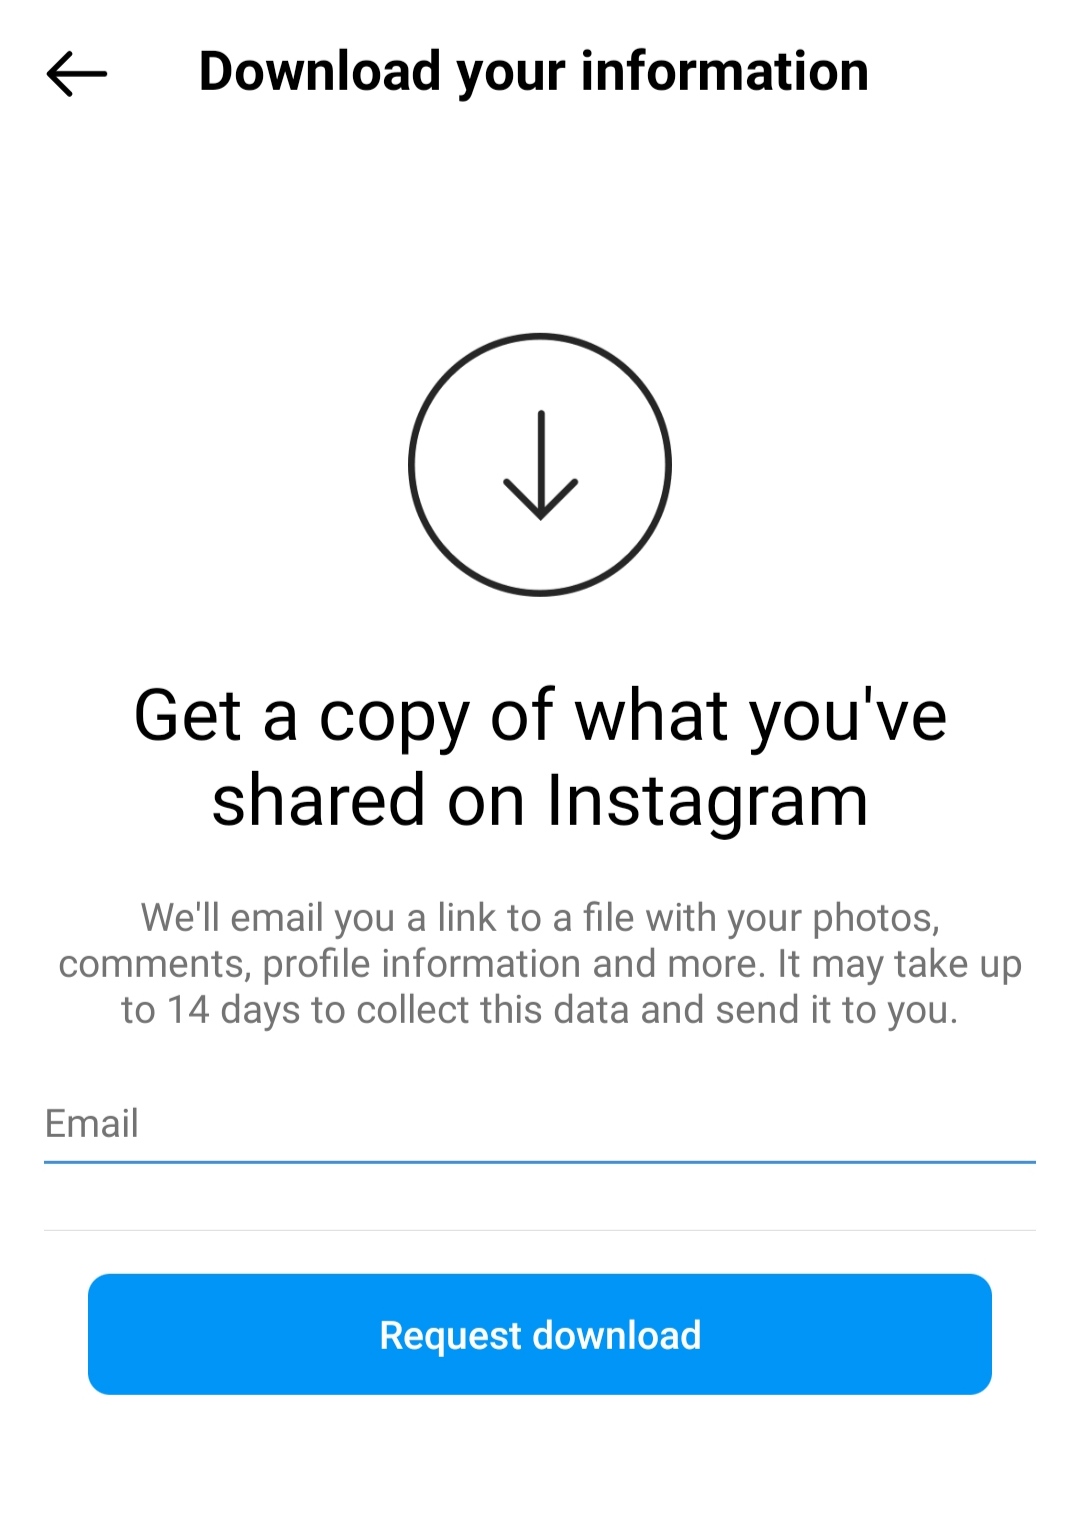 How to delete Instagram account or deactivate it 5